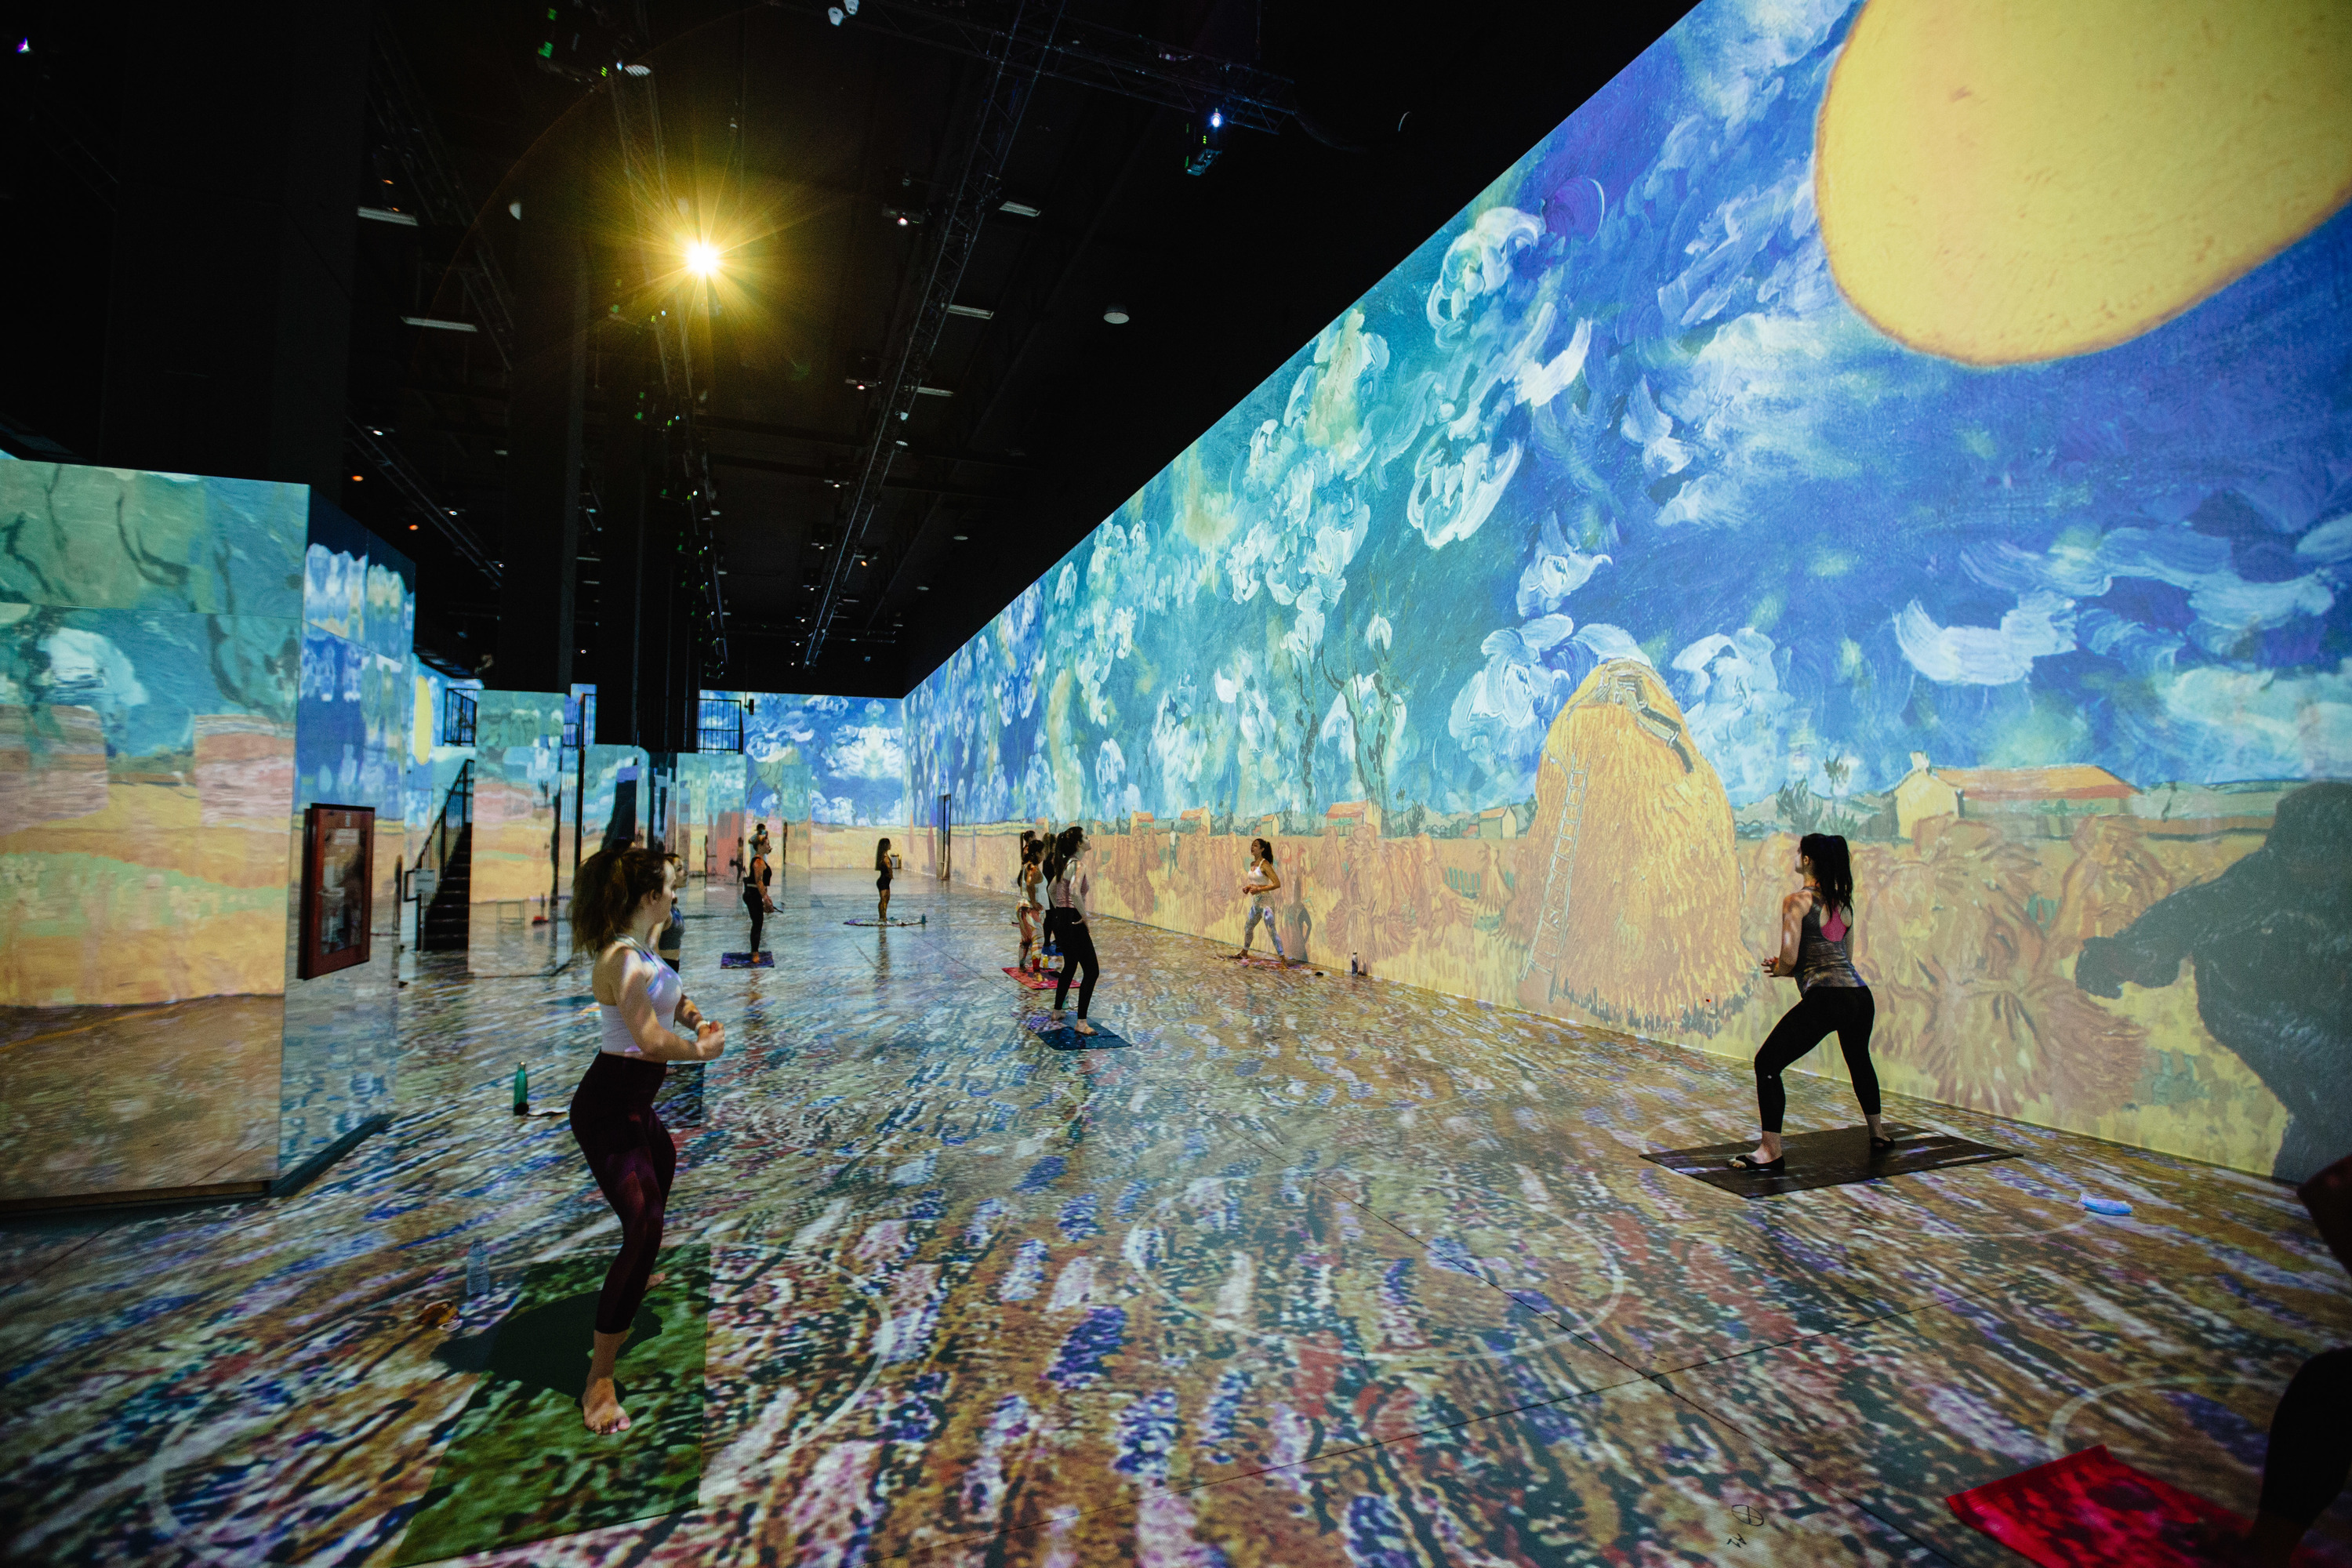 Art that moves: Van Gogh's journey to Vincent, in a nutshell - Immersive Van  Gogh Chicago